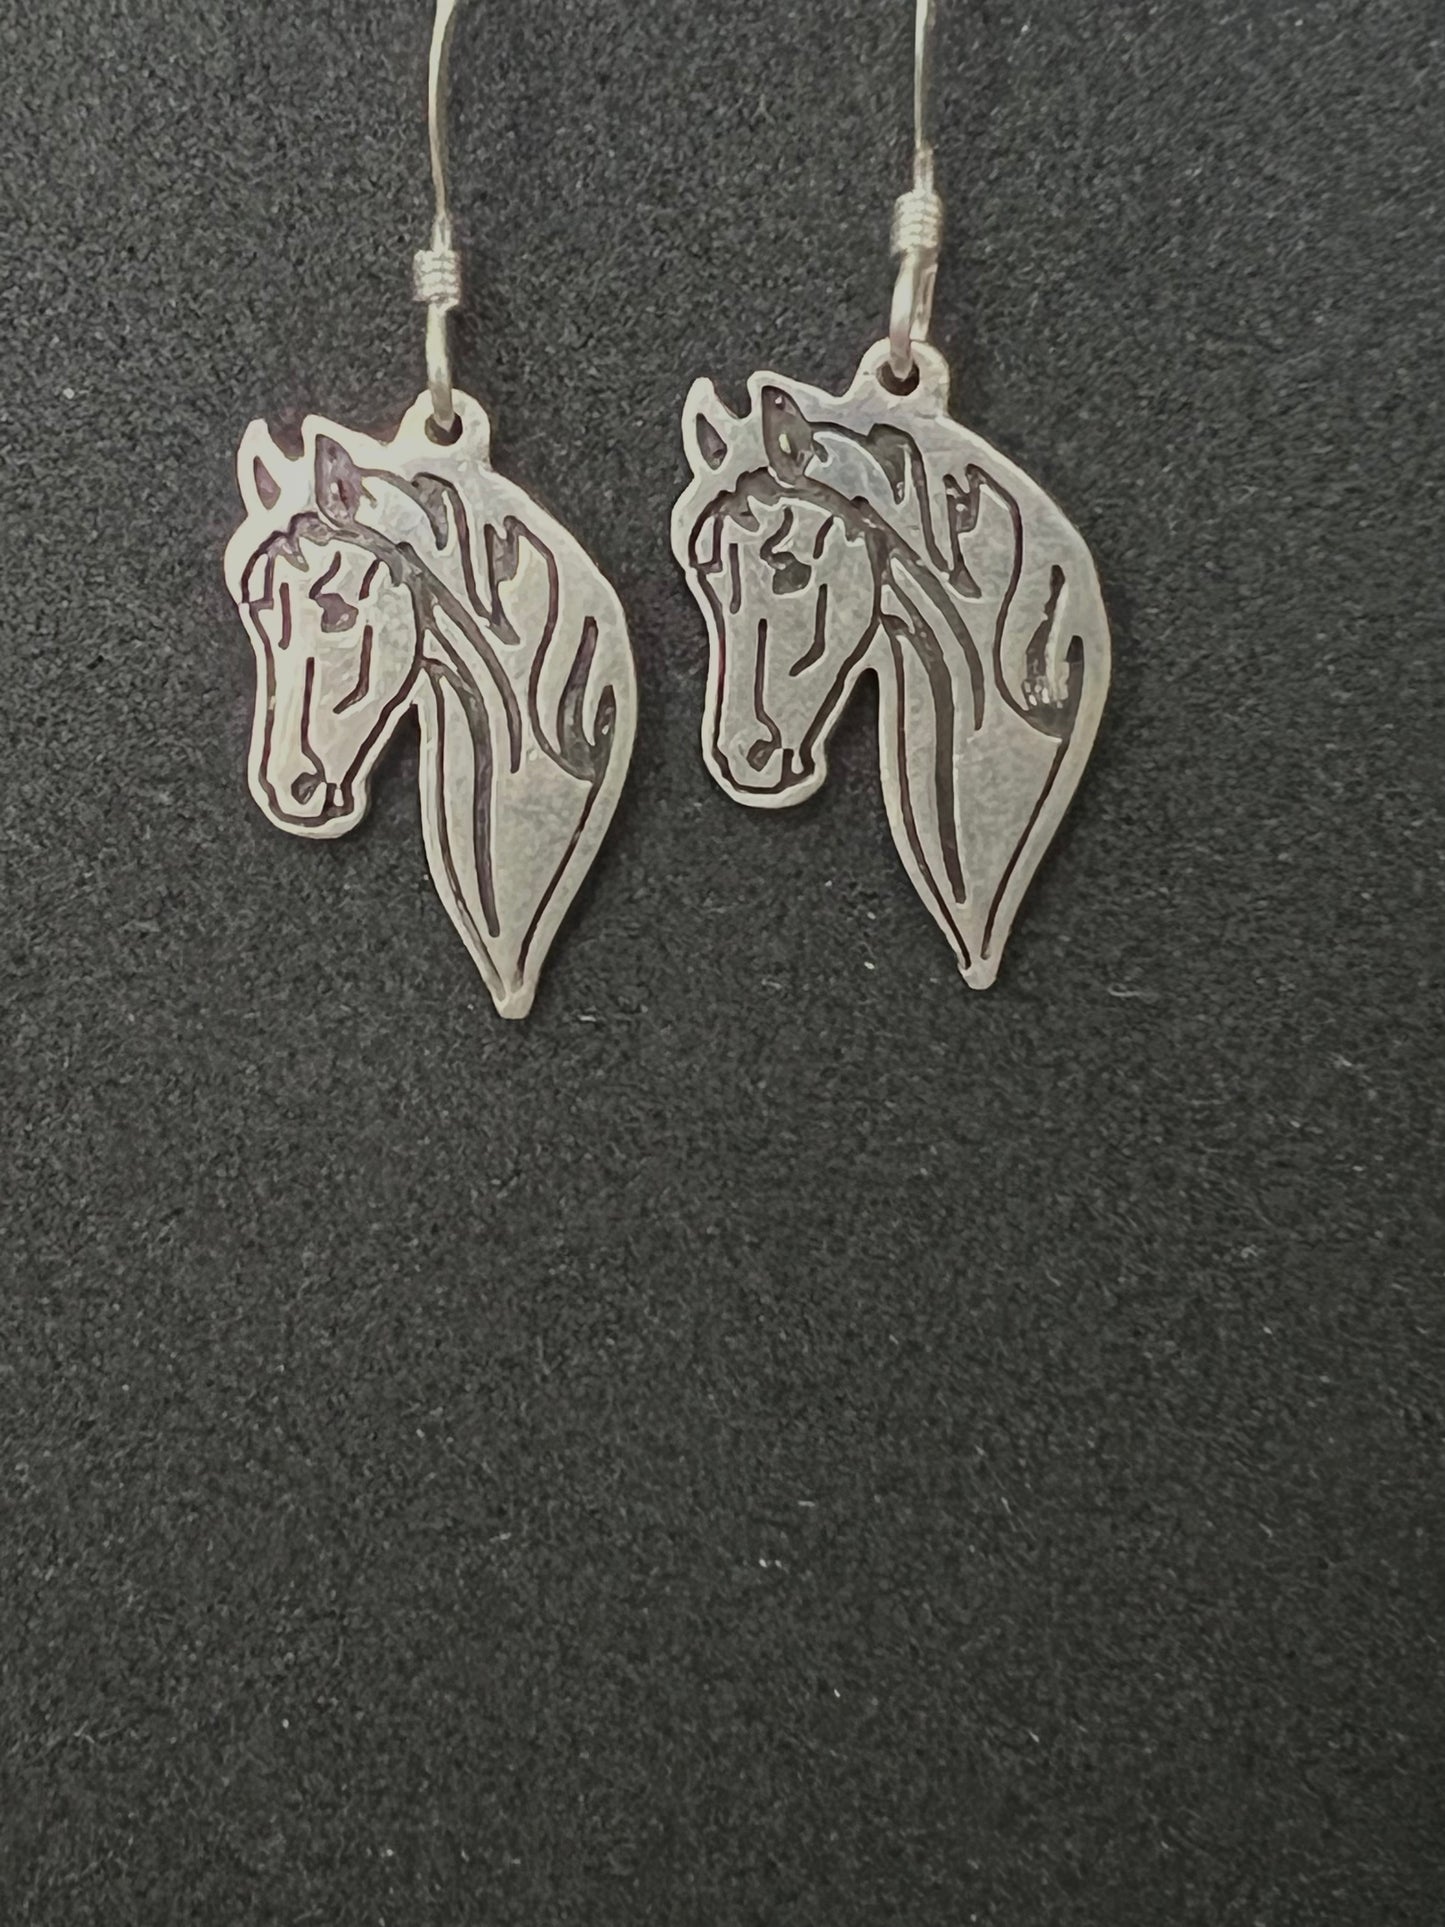 Sterling Silver horse head